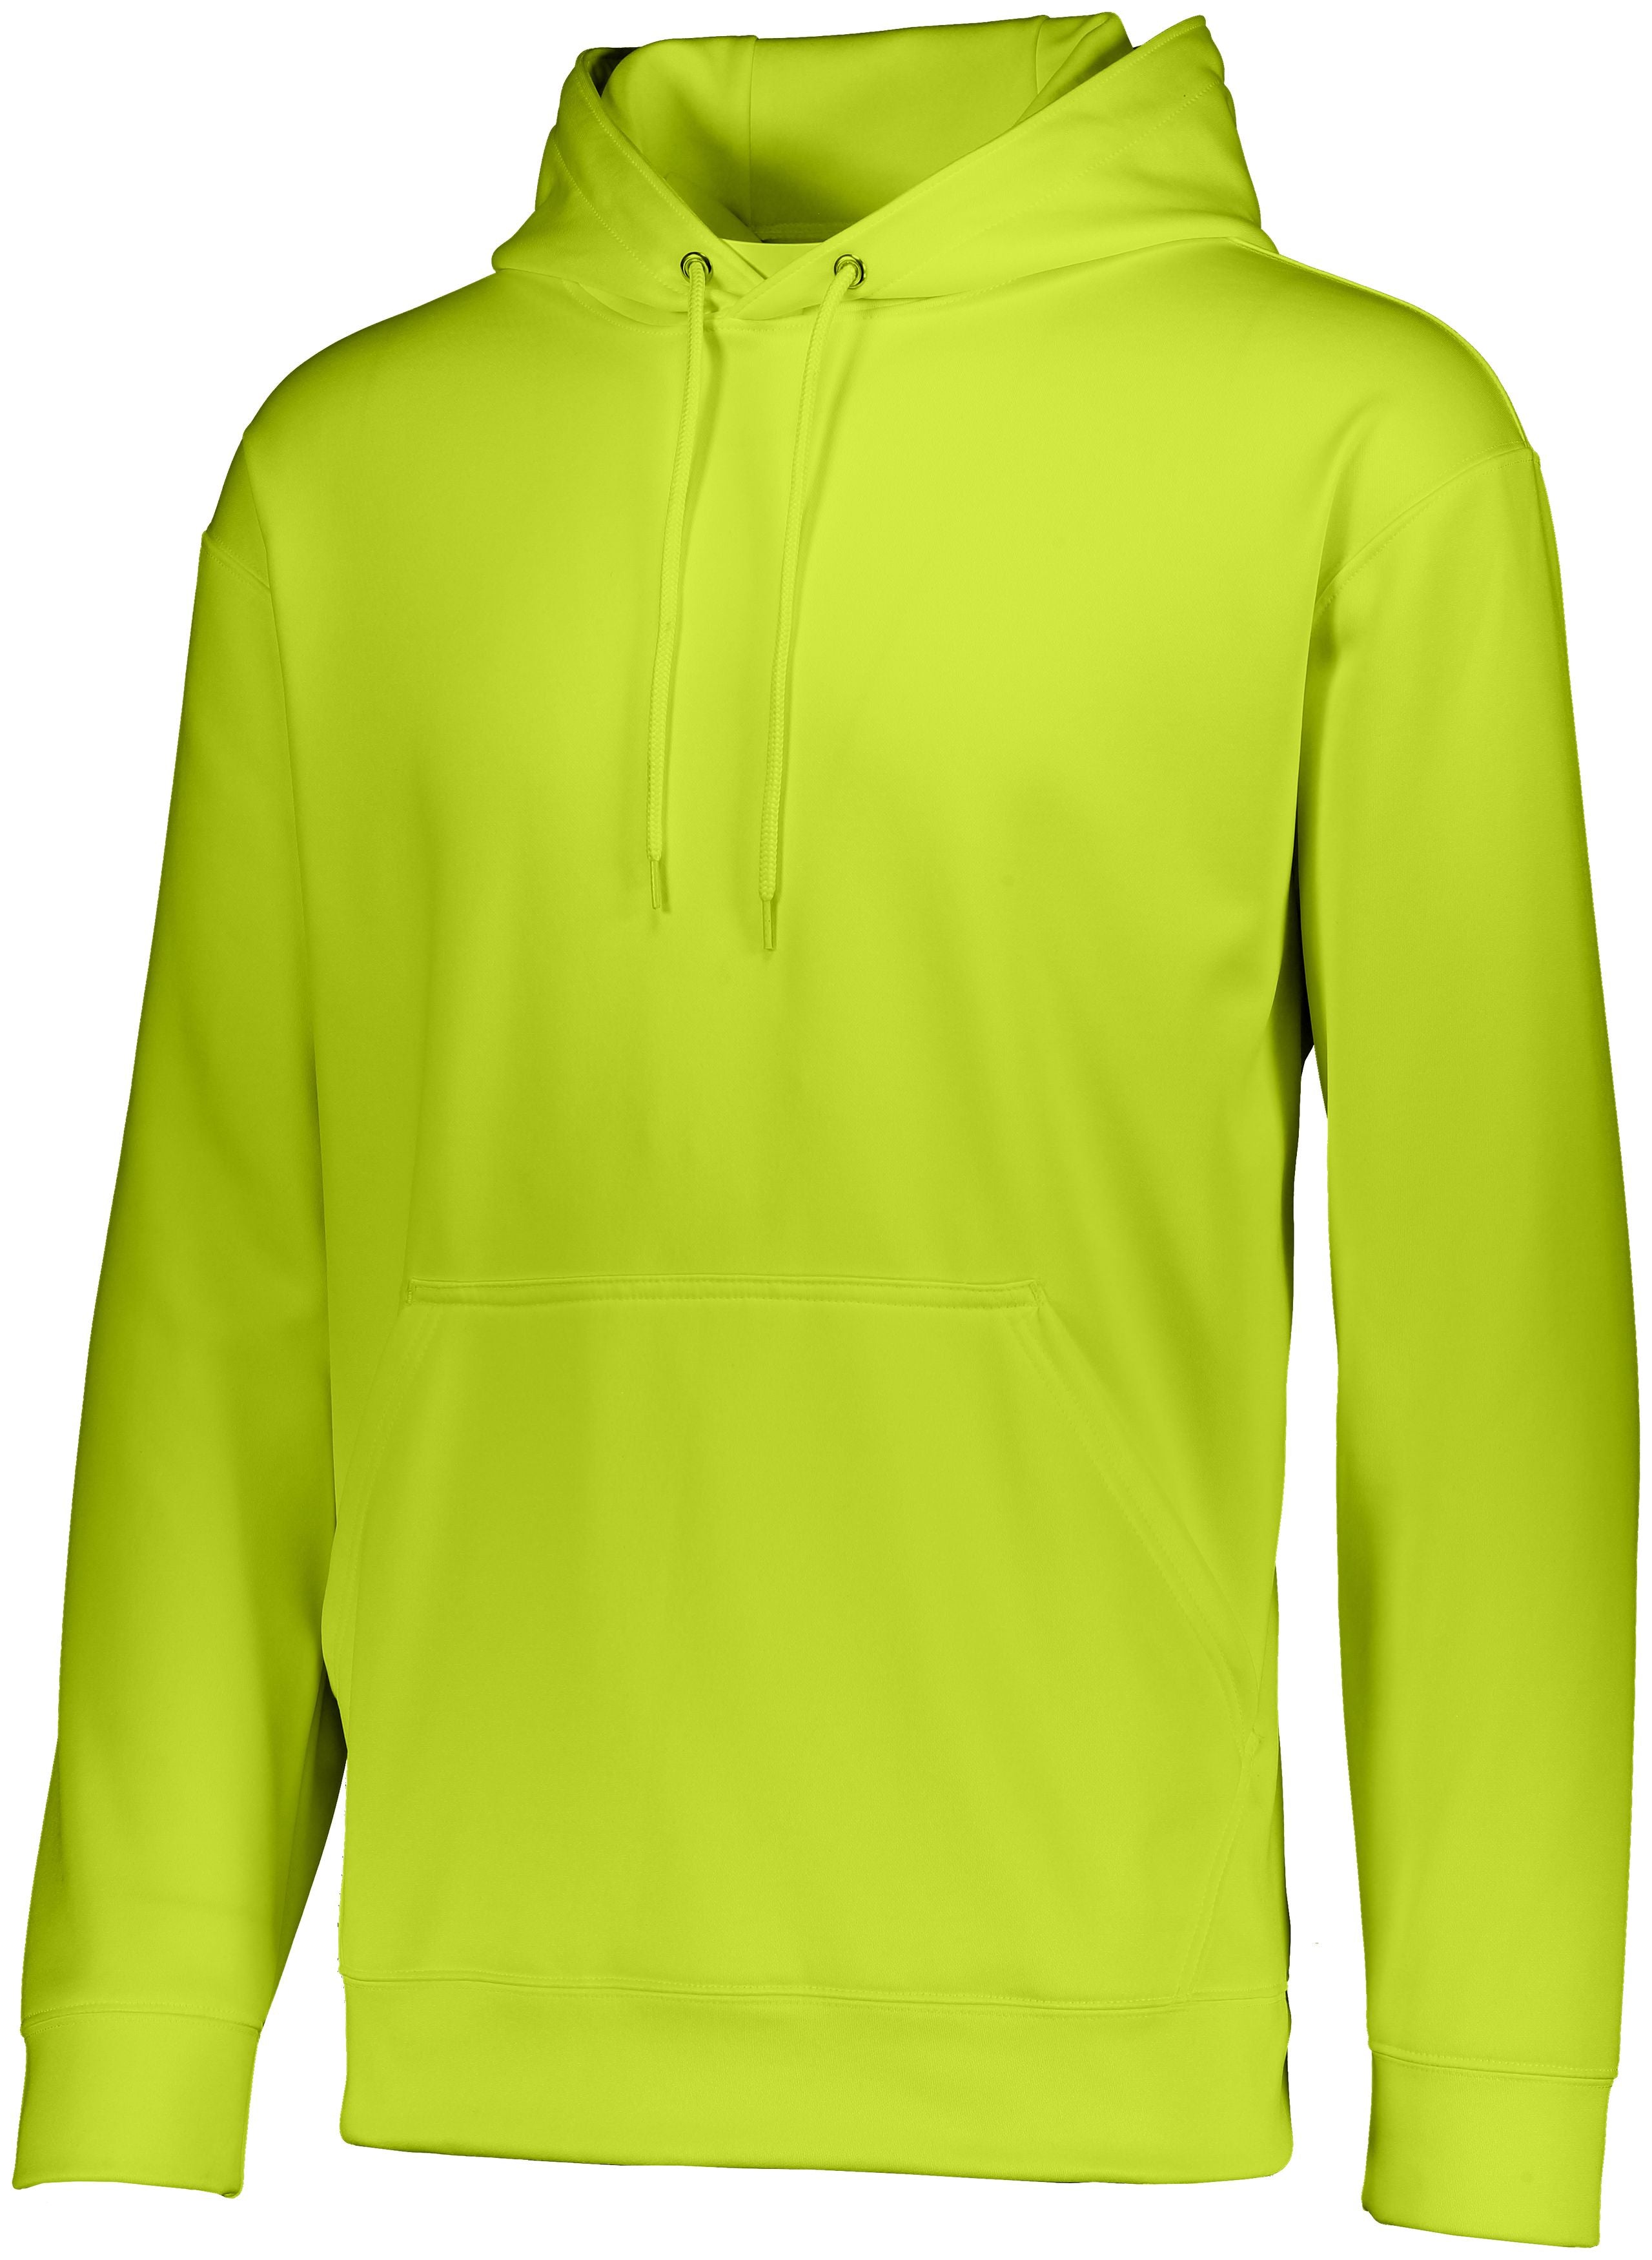 Augusta Sportswear Youth Wicking  Fleece Hoodie in Lime  -Part of the Youth, Youth-Sweatshirt, Augusta-Products, Outerwear product lines at KanaleyCreations.com